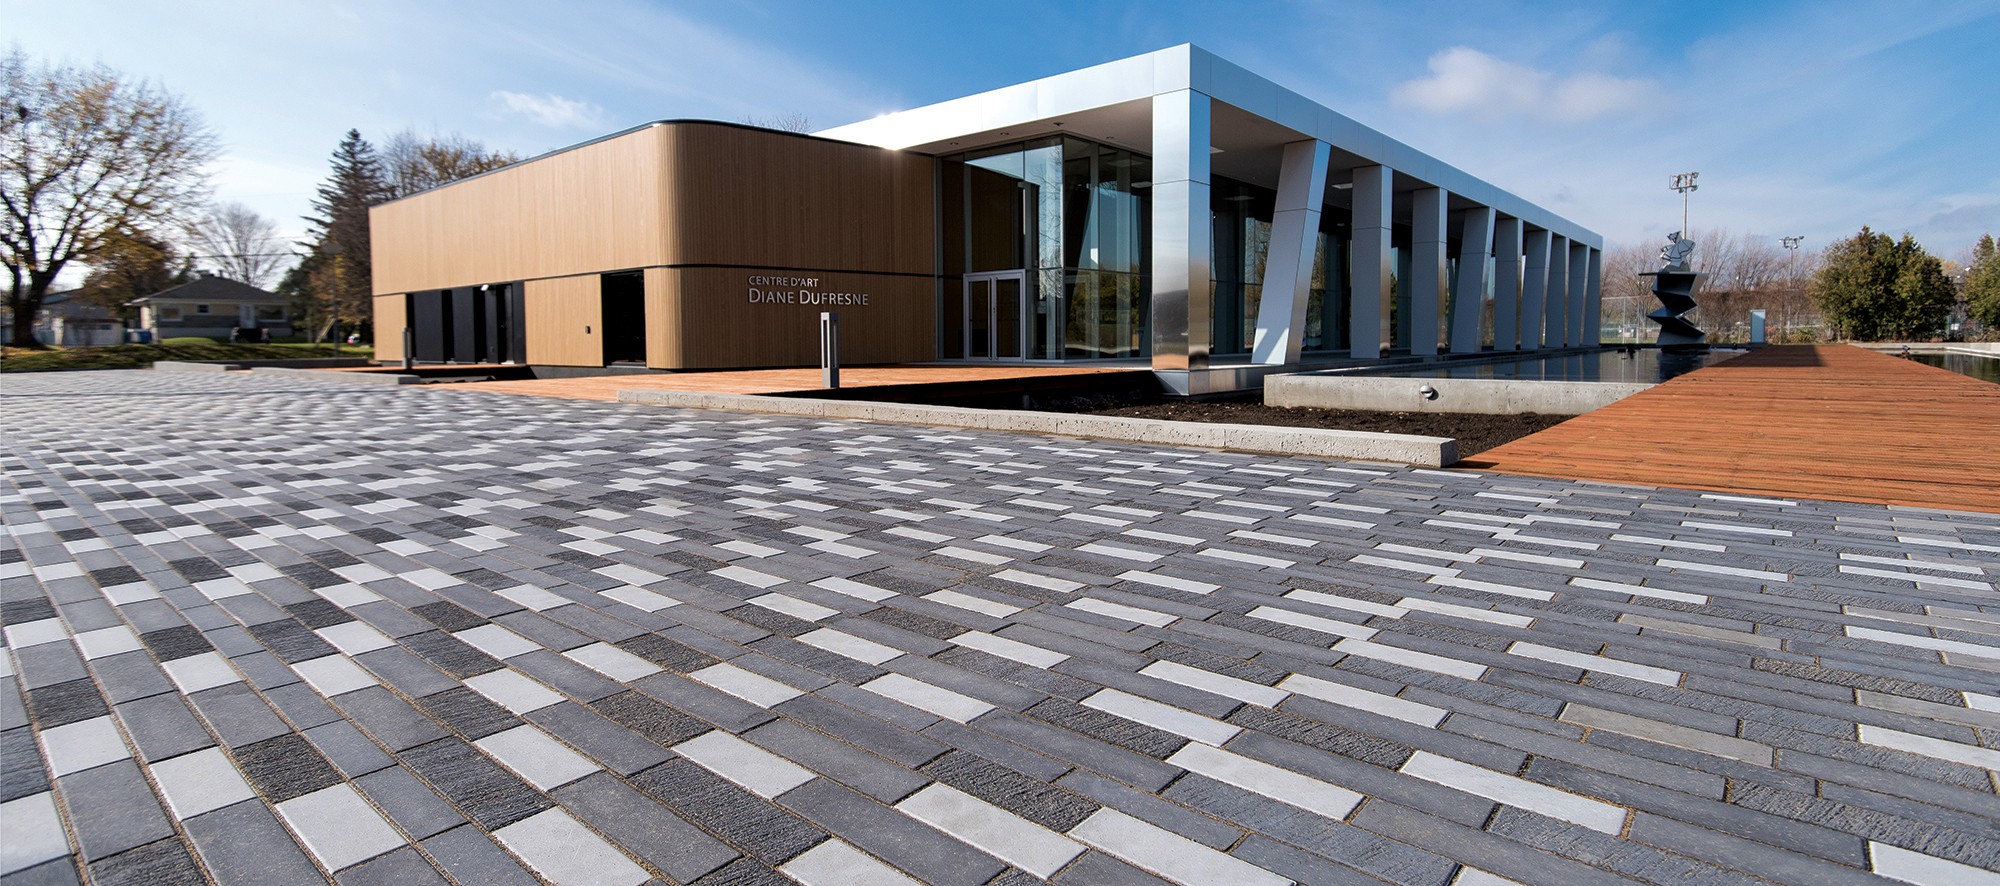 Tri-colored Il Campo pavers cohesively blend with the beige and chrome architecture of the building, bordered by boardwalk style walkways.